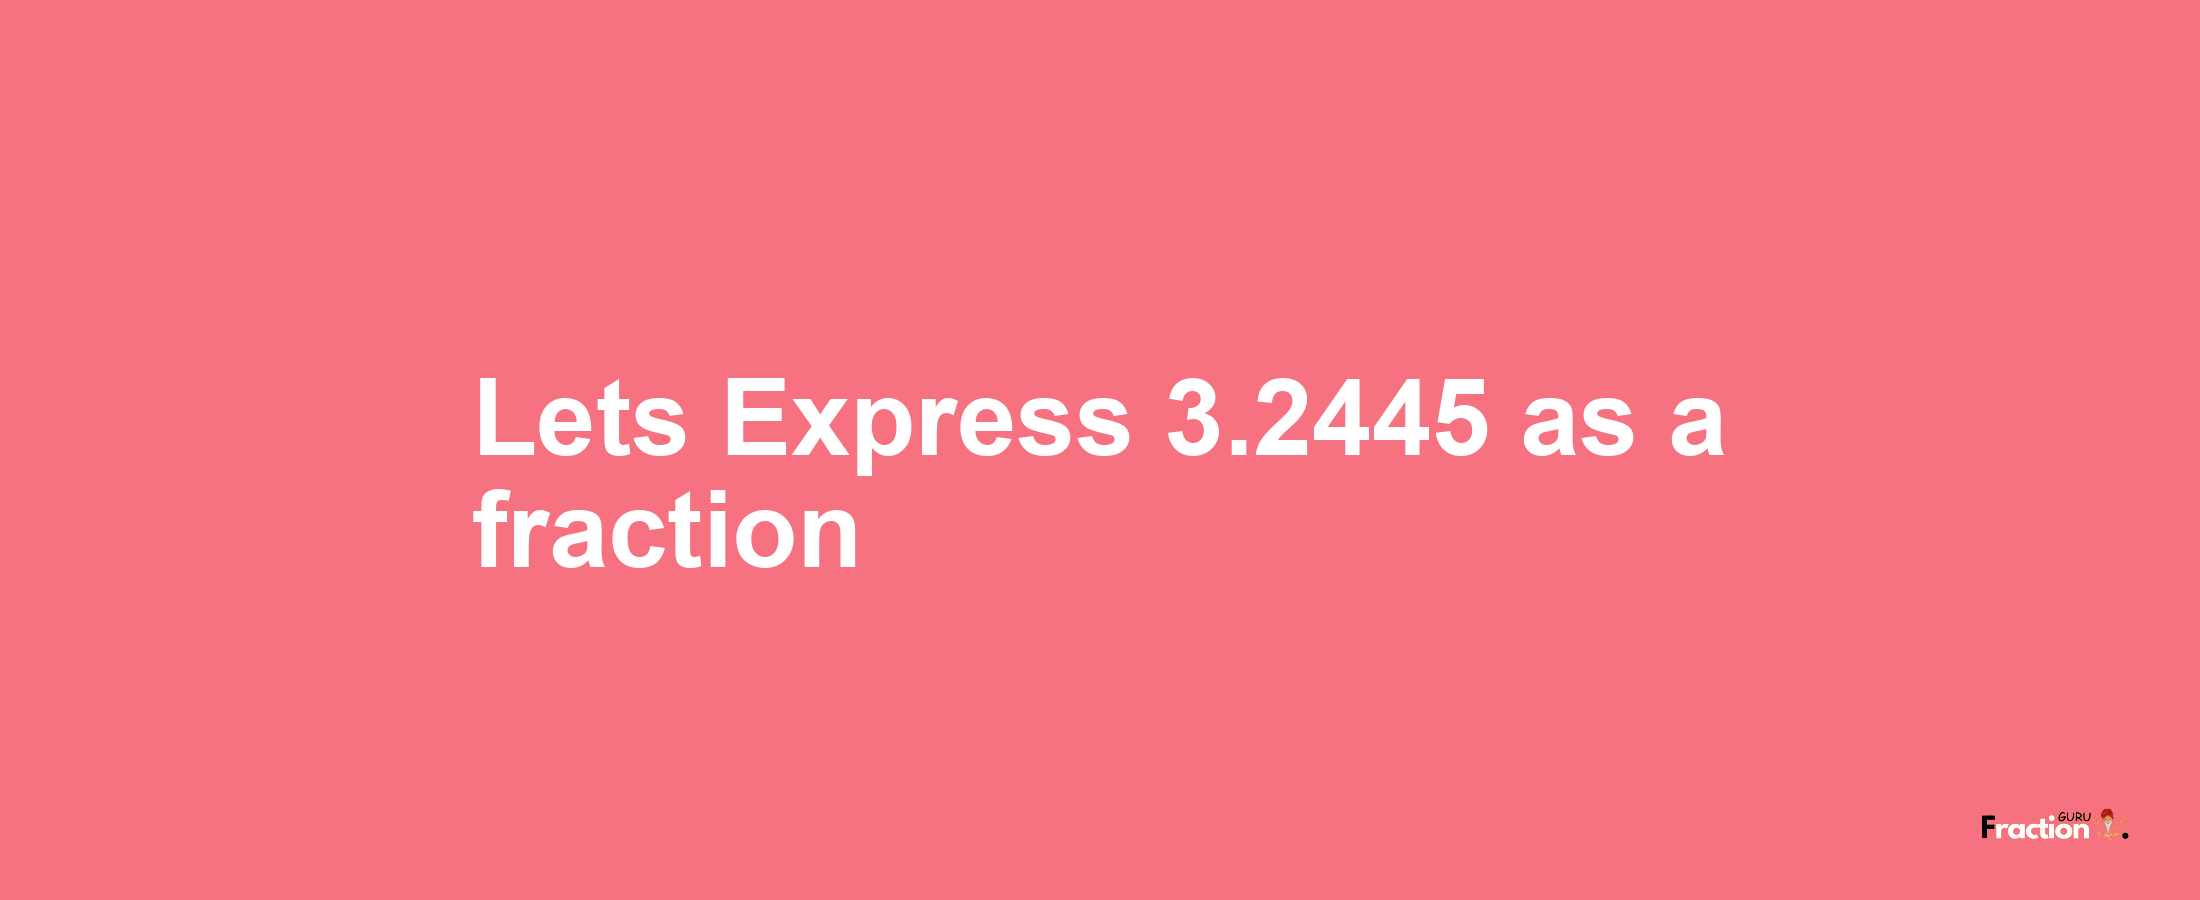 Lets Express 3.2445 as afraction